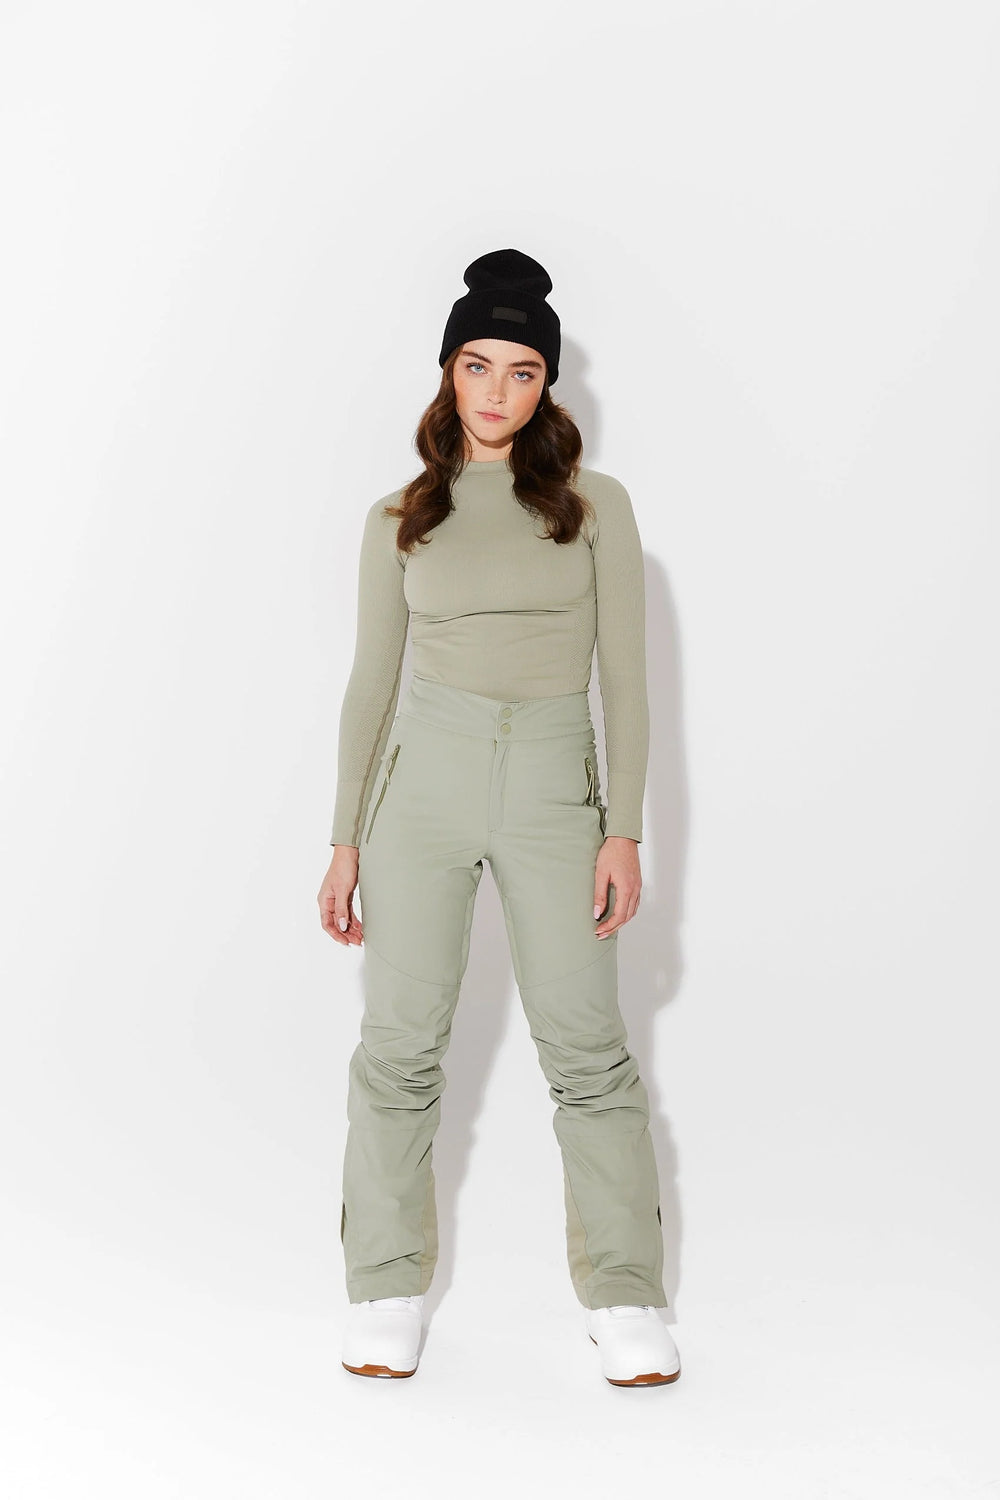 13 Best Snow Pants For Women That Are Fitted & Flattering – topsfordays